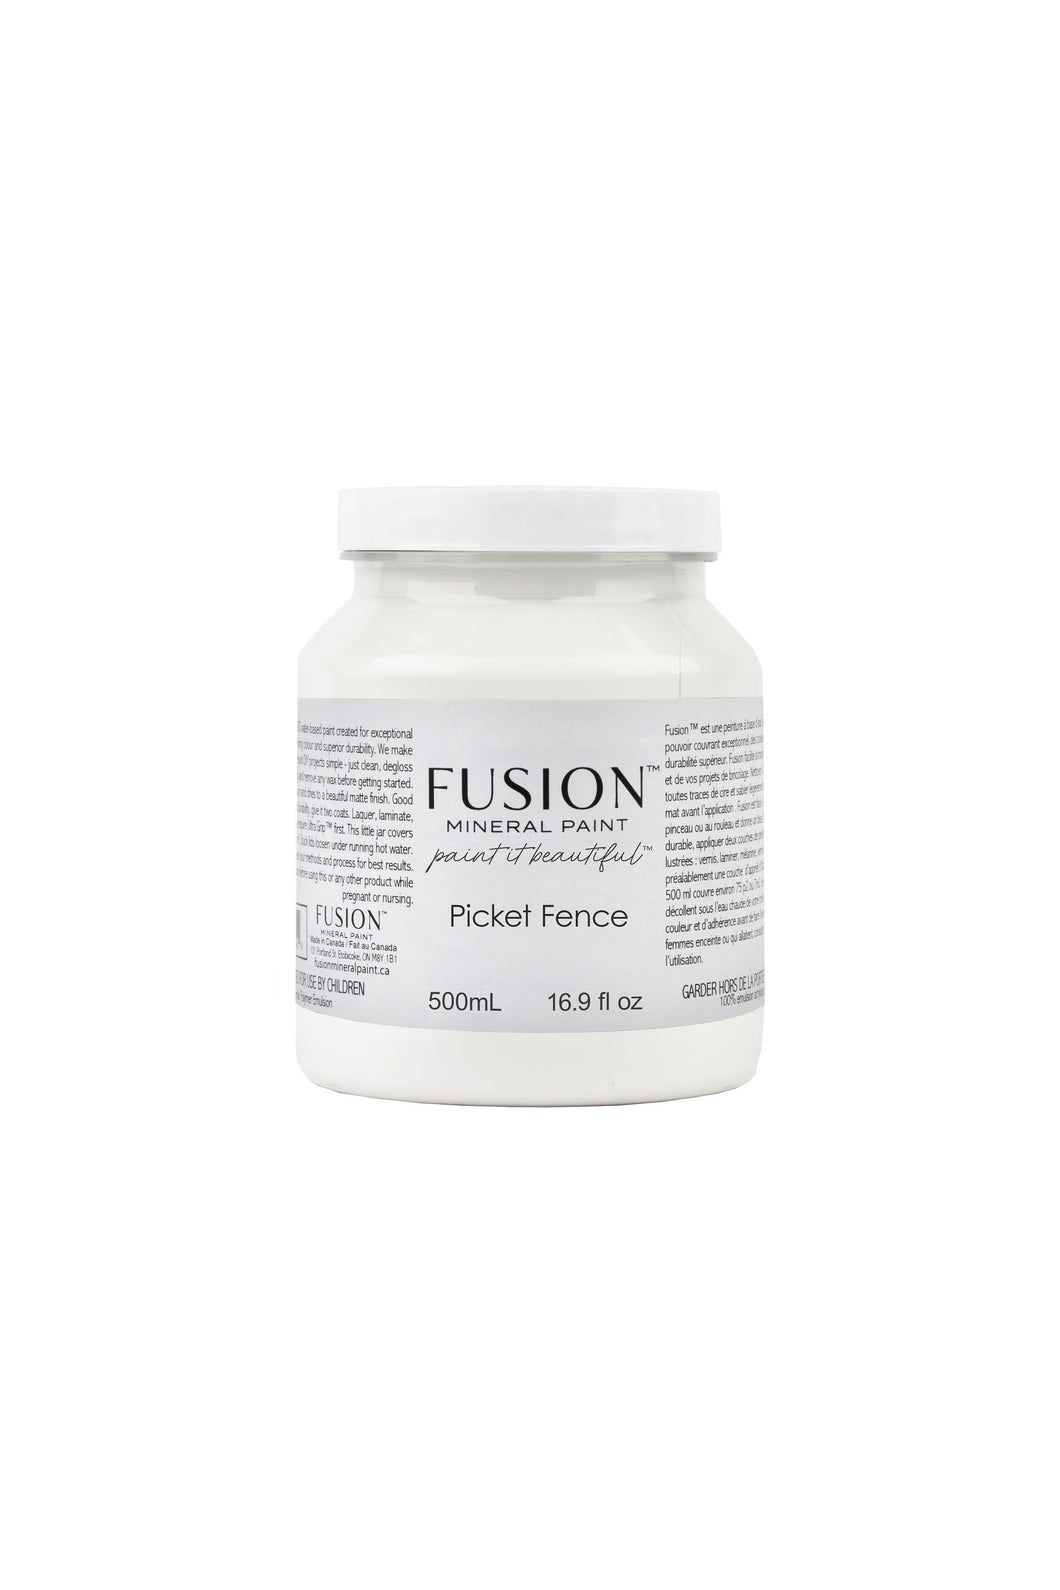 Fusion Mineral Paint - Picket Fence 500 ml Jar